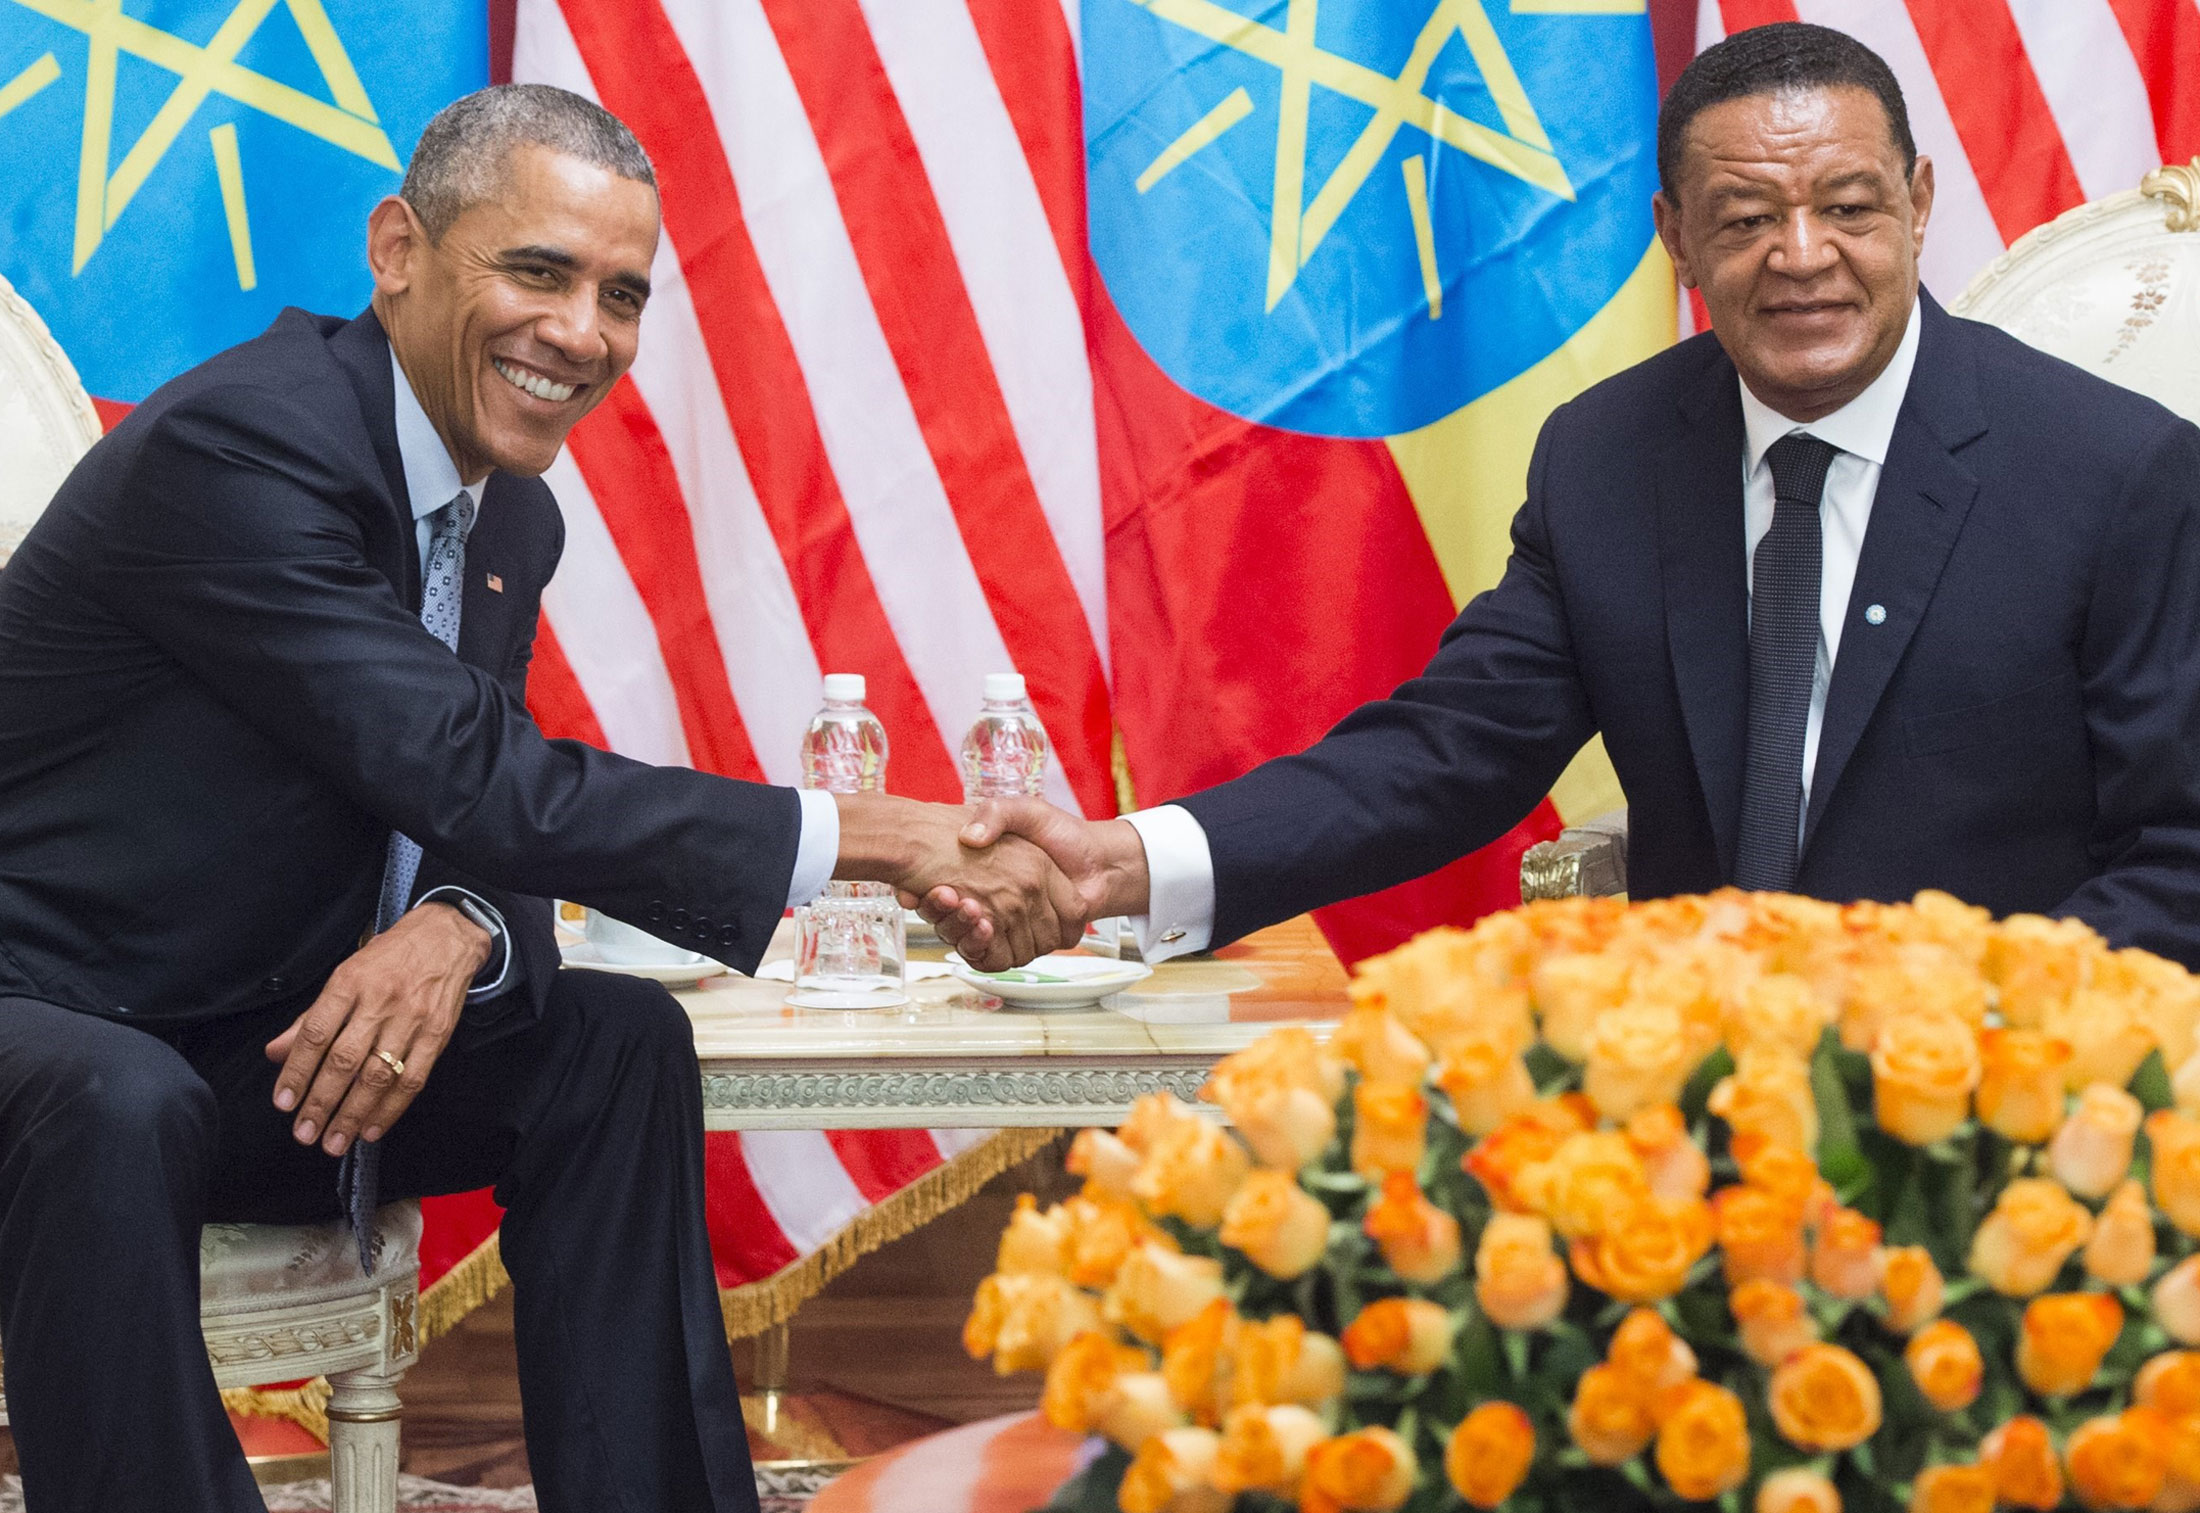 Ethiopia's government agreed to purchase power in an accord signed on Monday during President Barack Obama’s visit to the Horn of Africa nation.
